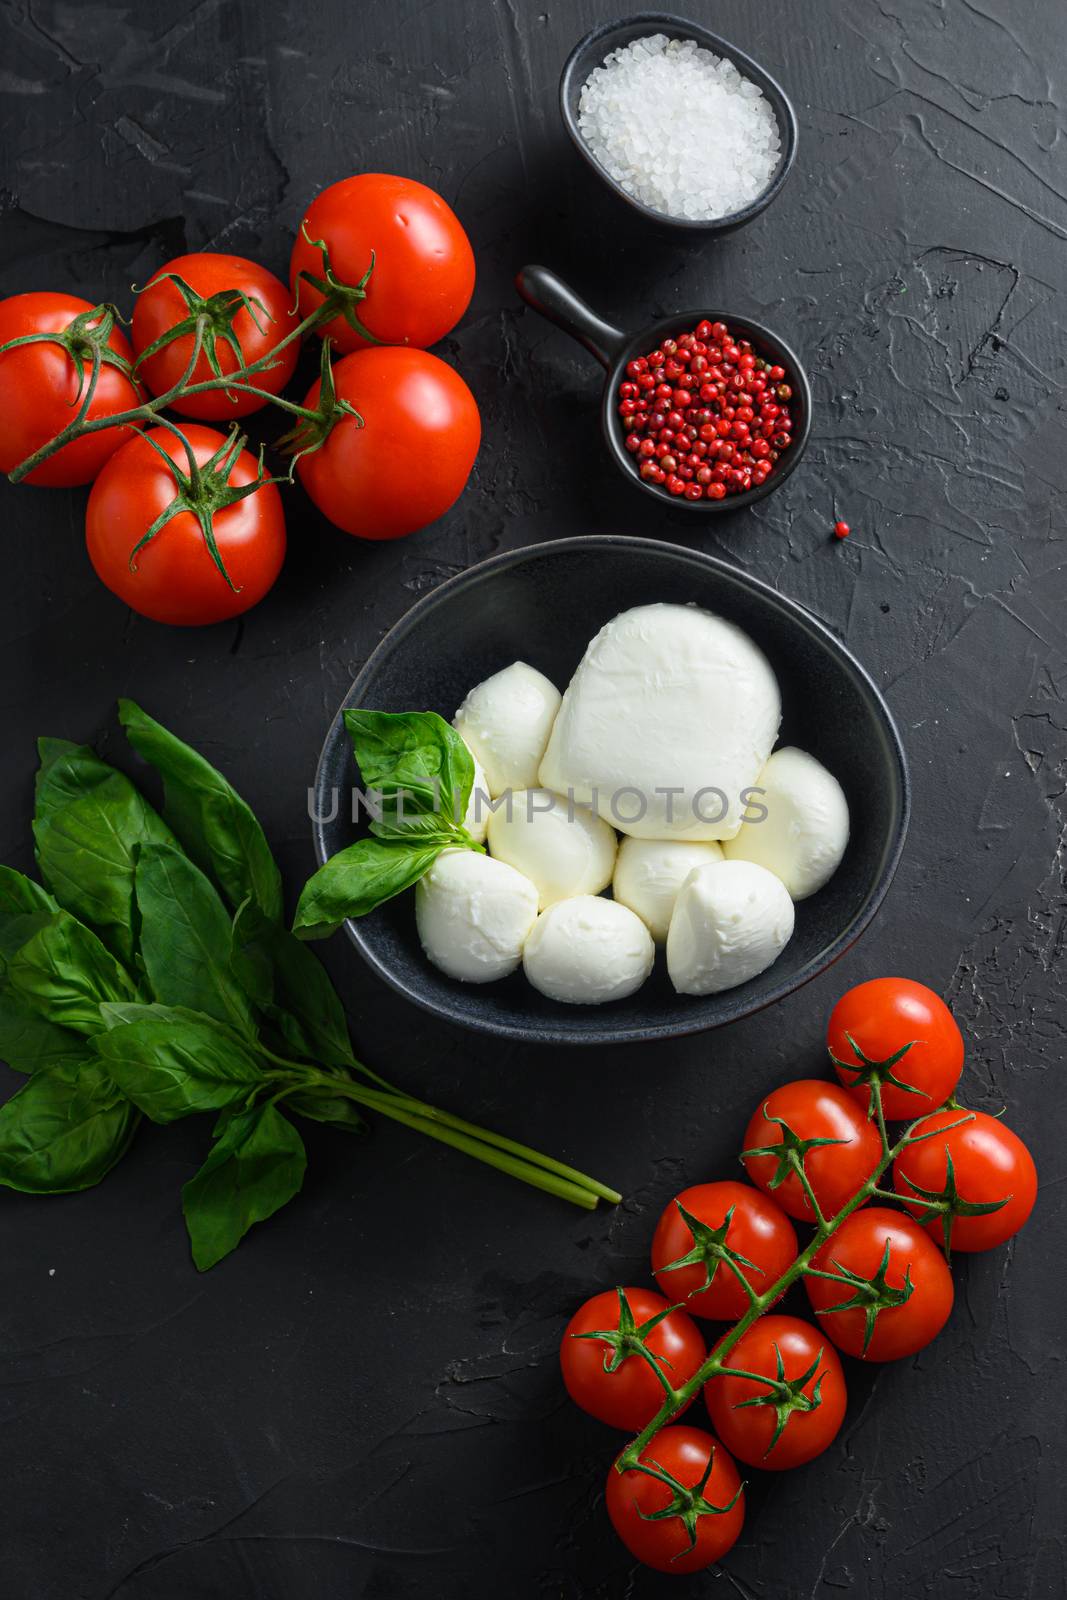 caprese salad ingredients Mozzarella balls, buffalo , tomatoes, basil leaves, olive oil with vinegar pepper salt Italian recipe black stone background. selective focus, copy space. Top view. by Ilianesolenyi